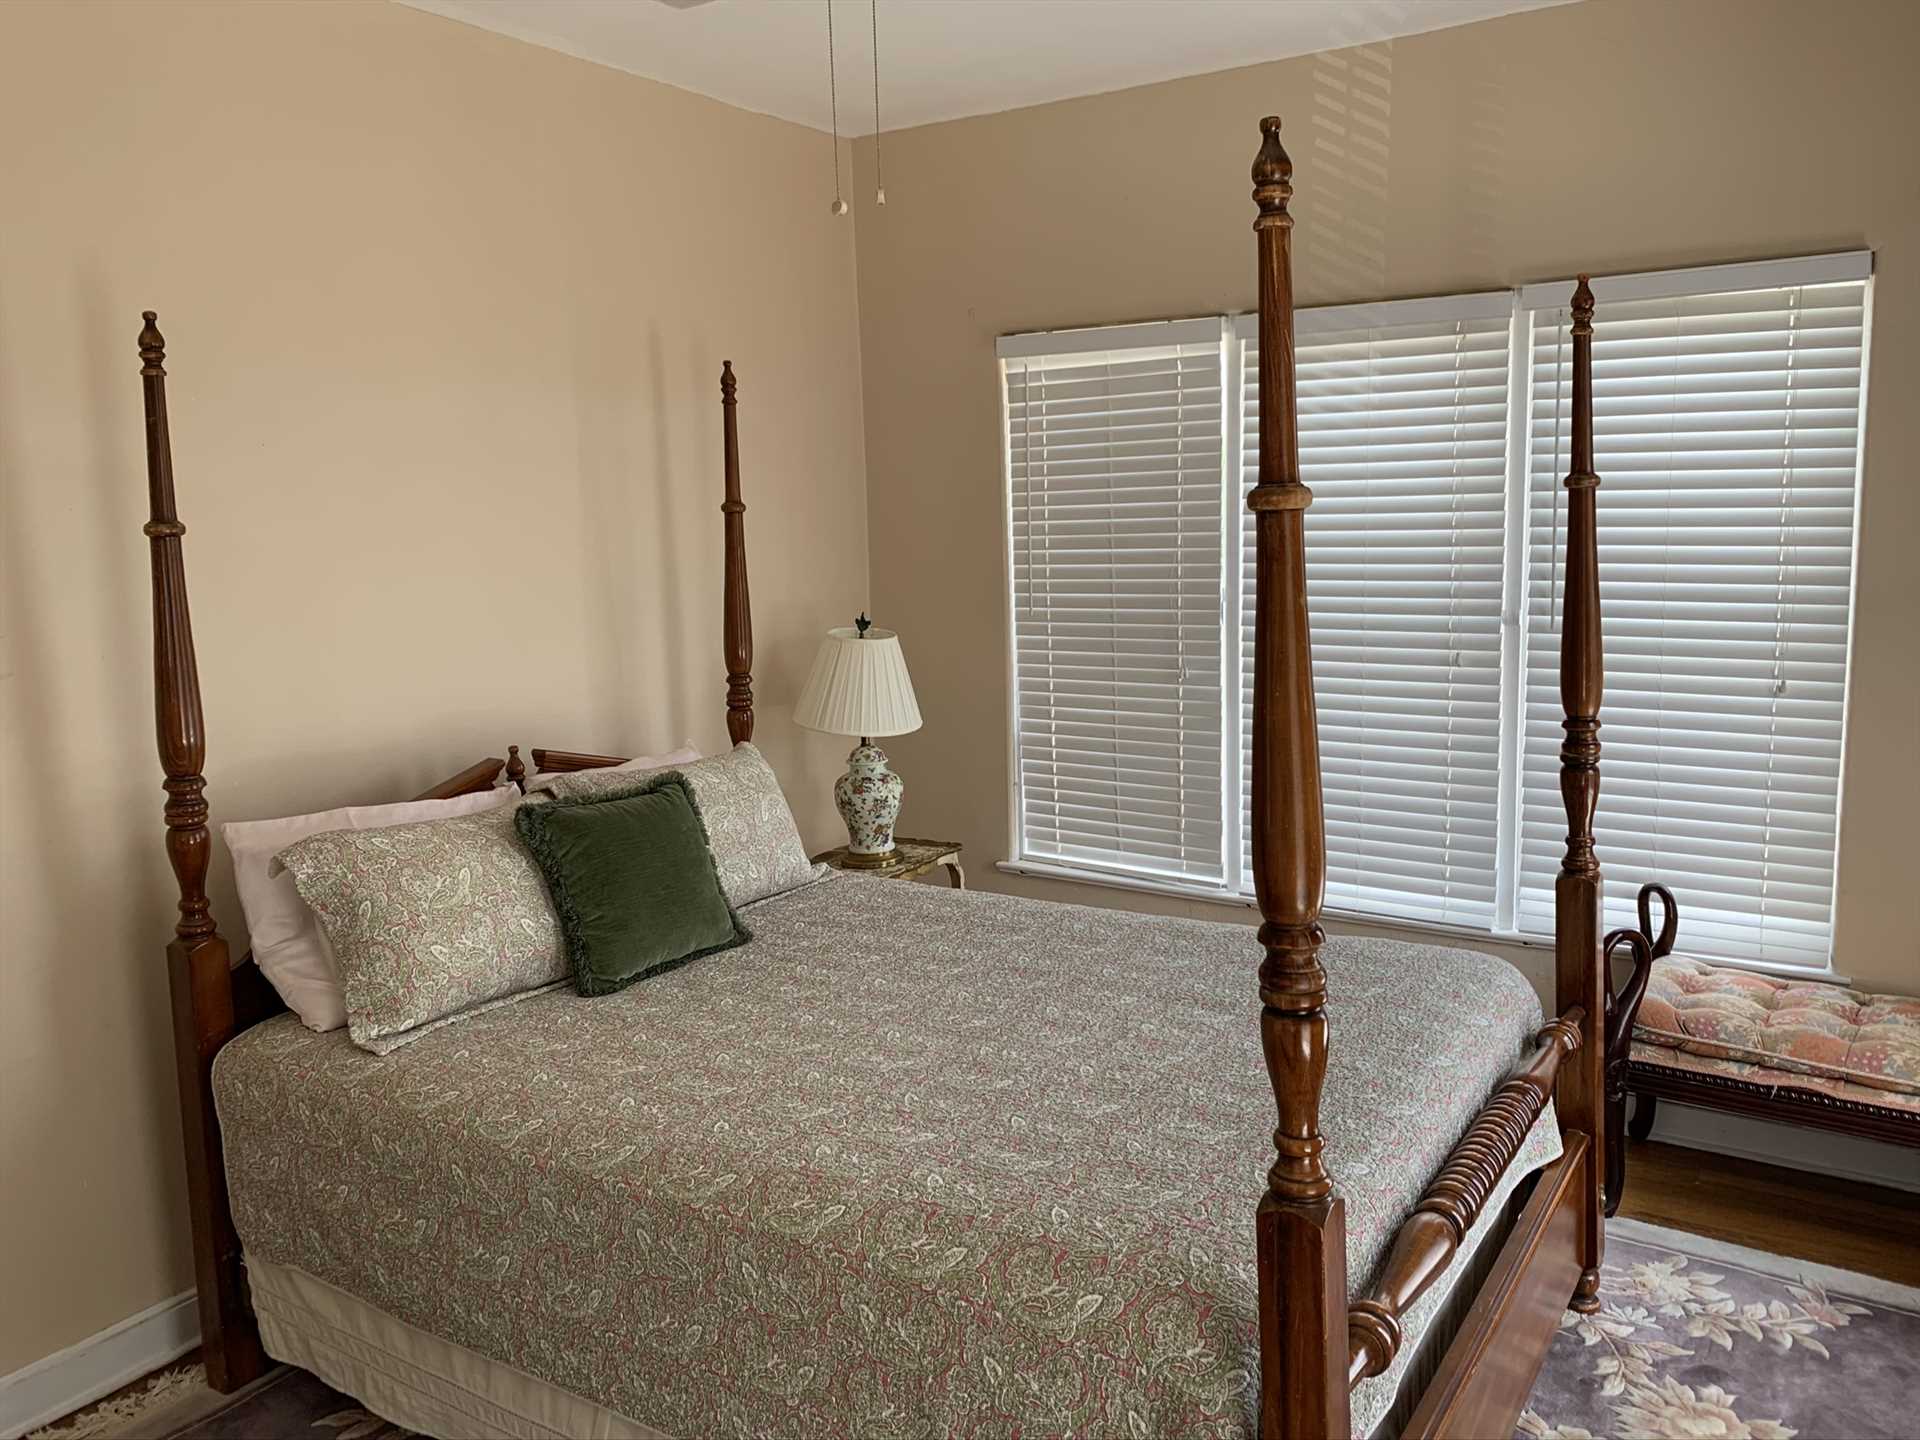                                                 A four-poster queen-sized bed in the master bedroom provides a little slice of history and a lot of restful slumber!